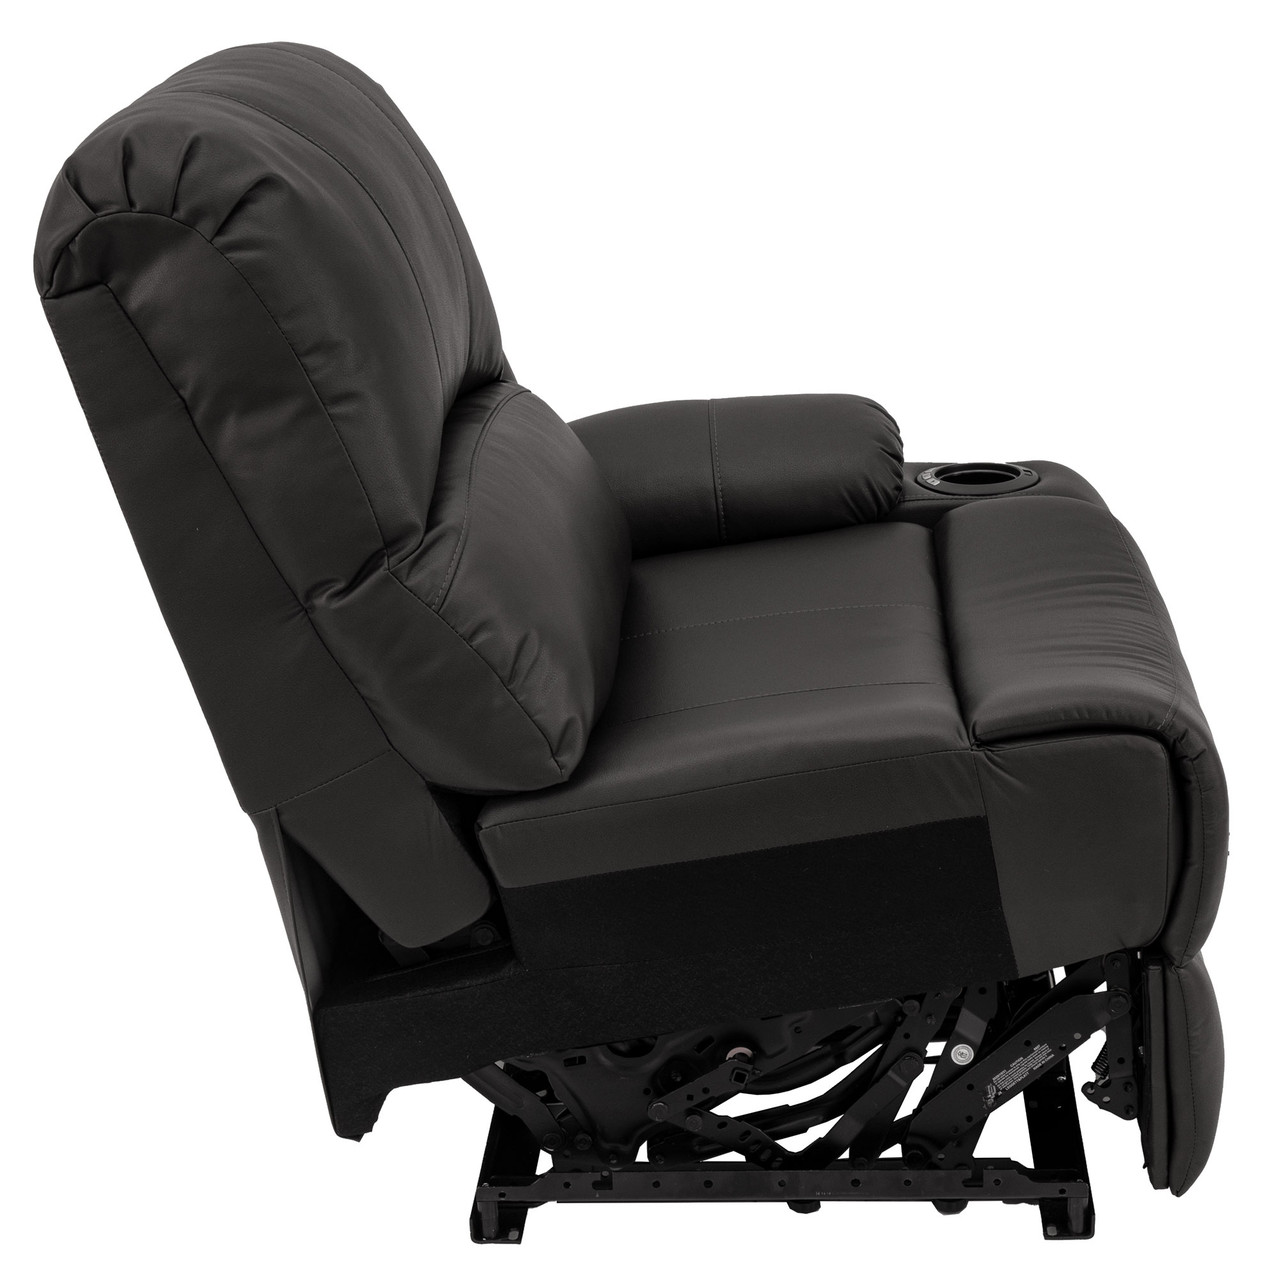 Dropship Trevor Triple Power Recliner,Genuine Leather,Standard Recliner  Chair,Lumbar Support,Adjustable Headrest,USB & Type C Charge Port to Sell  Online at a Lower Price